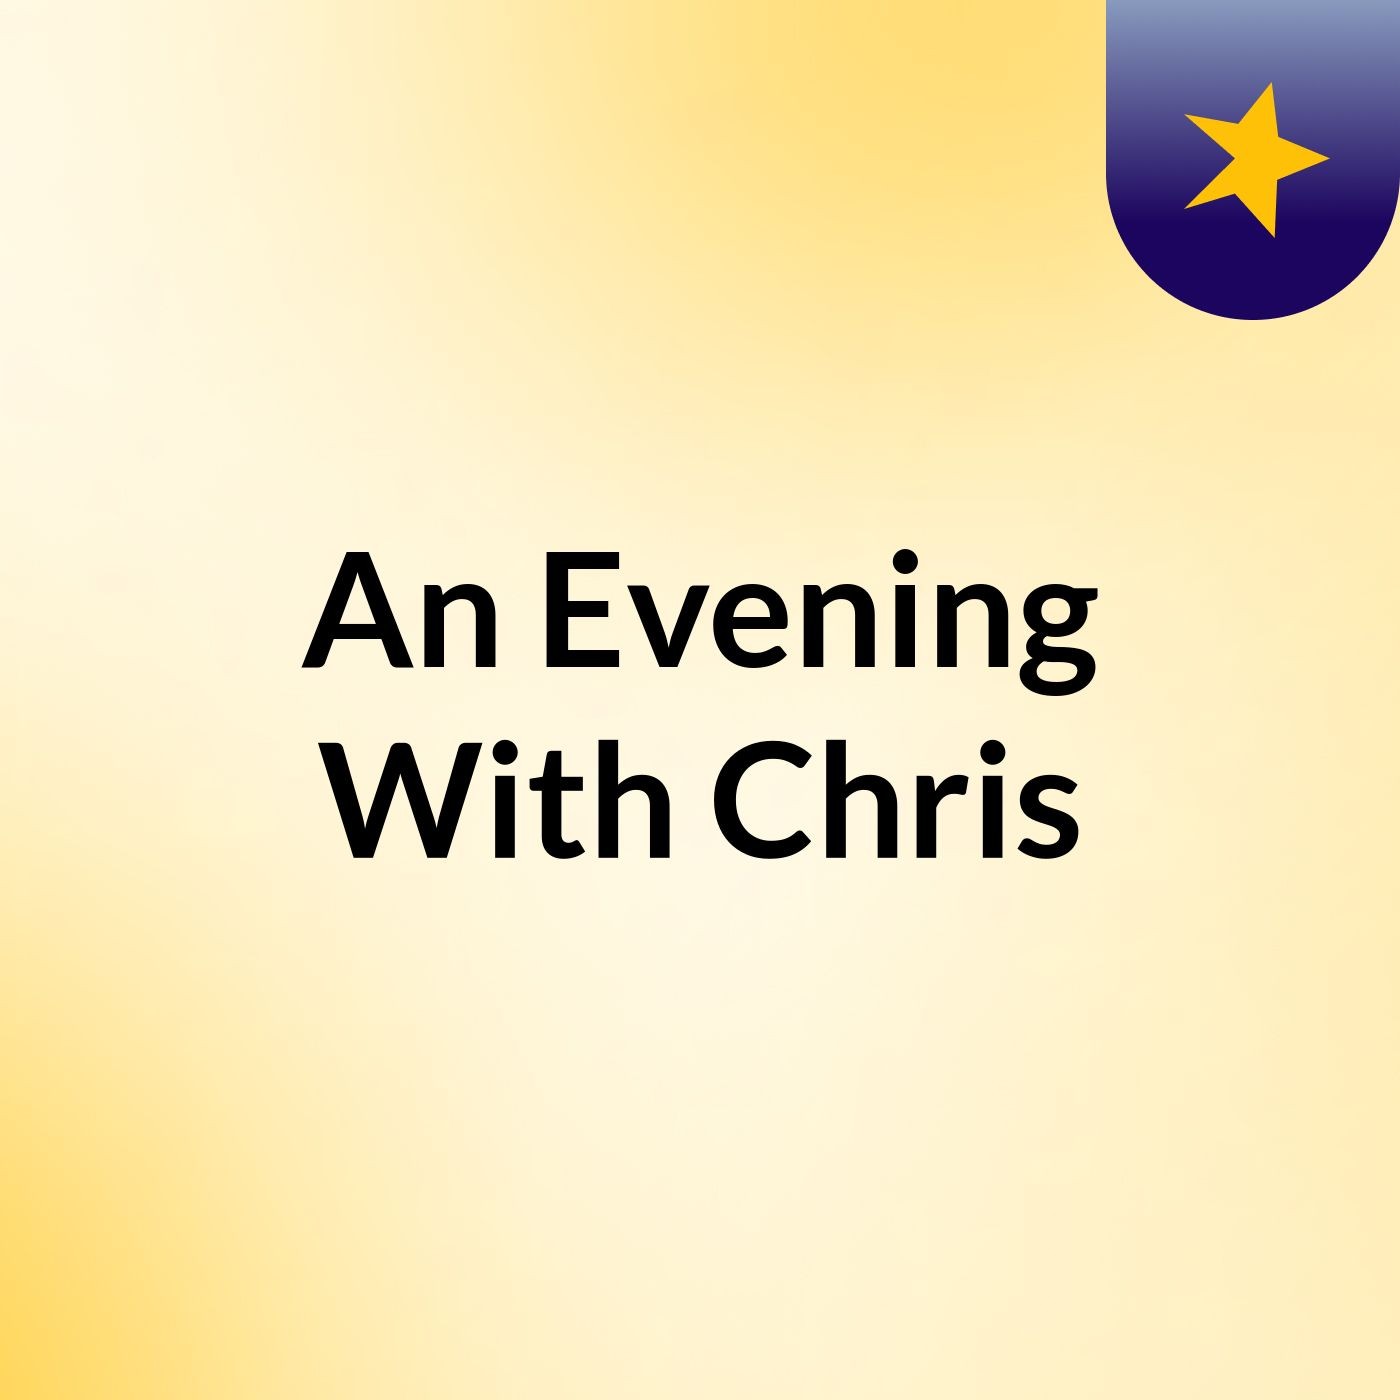 Episode 1 - An Evening With Chris